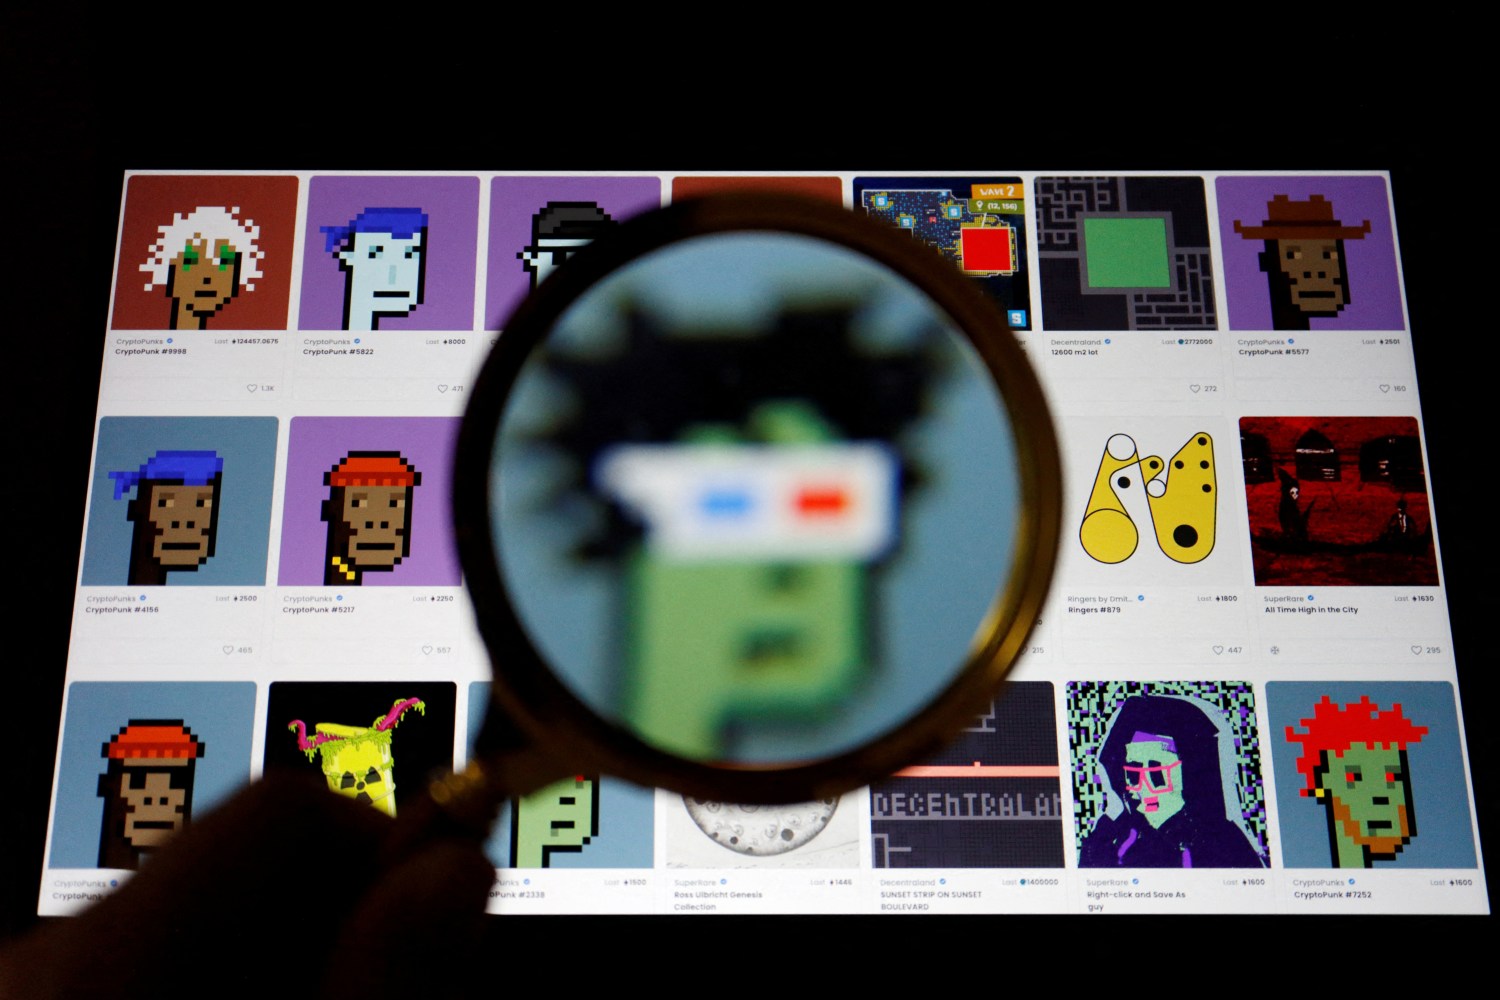 FILE PHOTO: A non-fungible token (NFT) displayed on the website of NFT marketplace OpenSea is seen through a magnifying glass, in this illustration picture taken February 28, 2022. REUTERS/Florence Lo/Illustration/File Photo